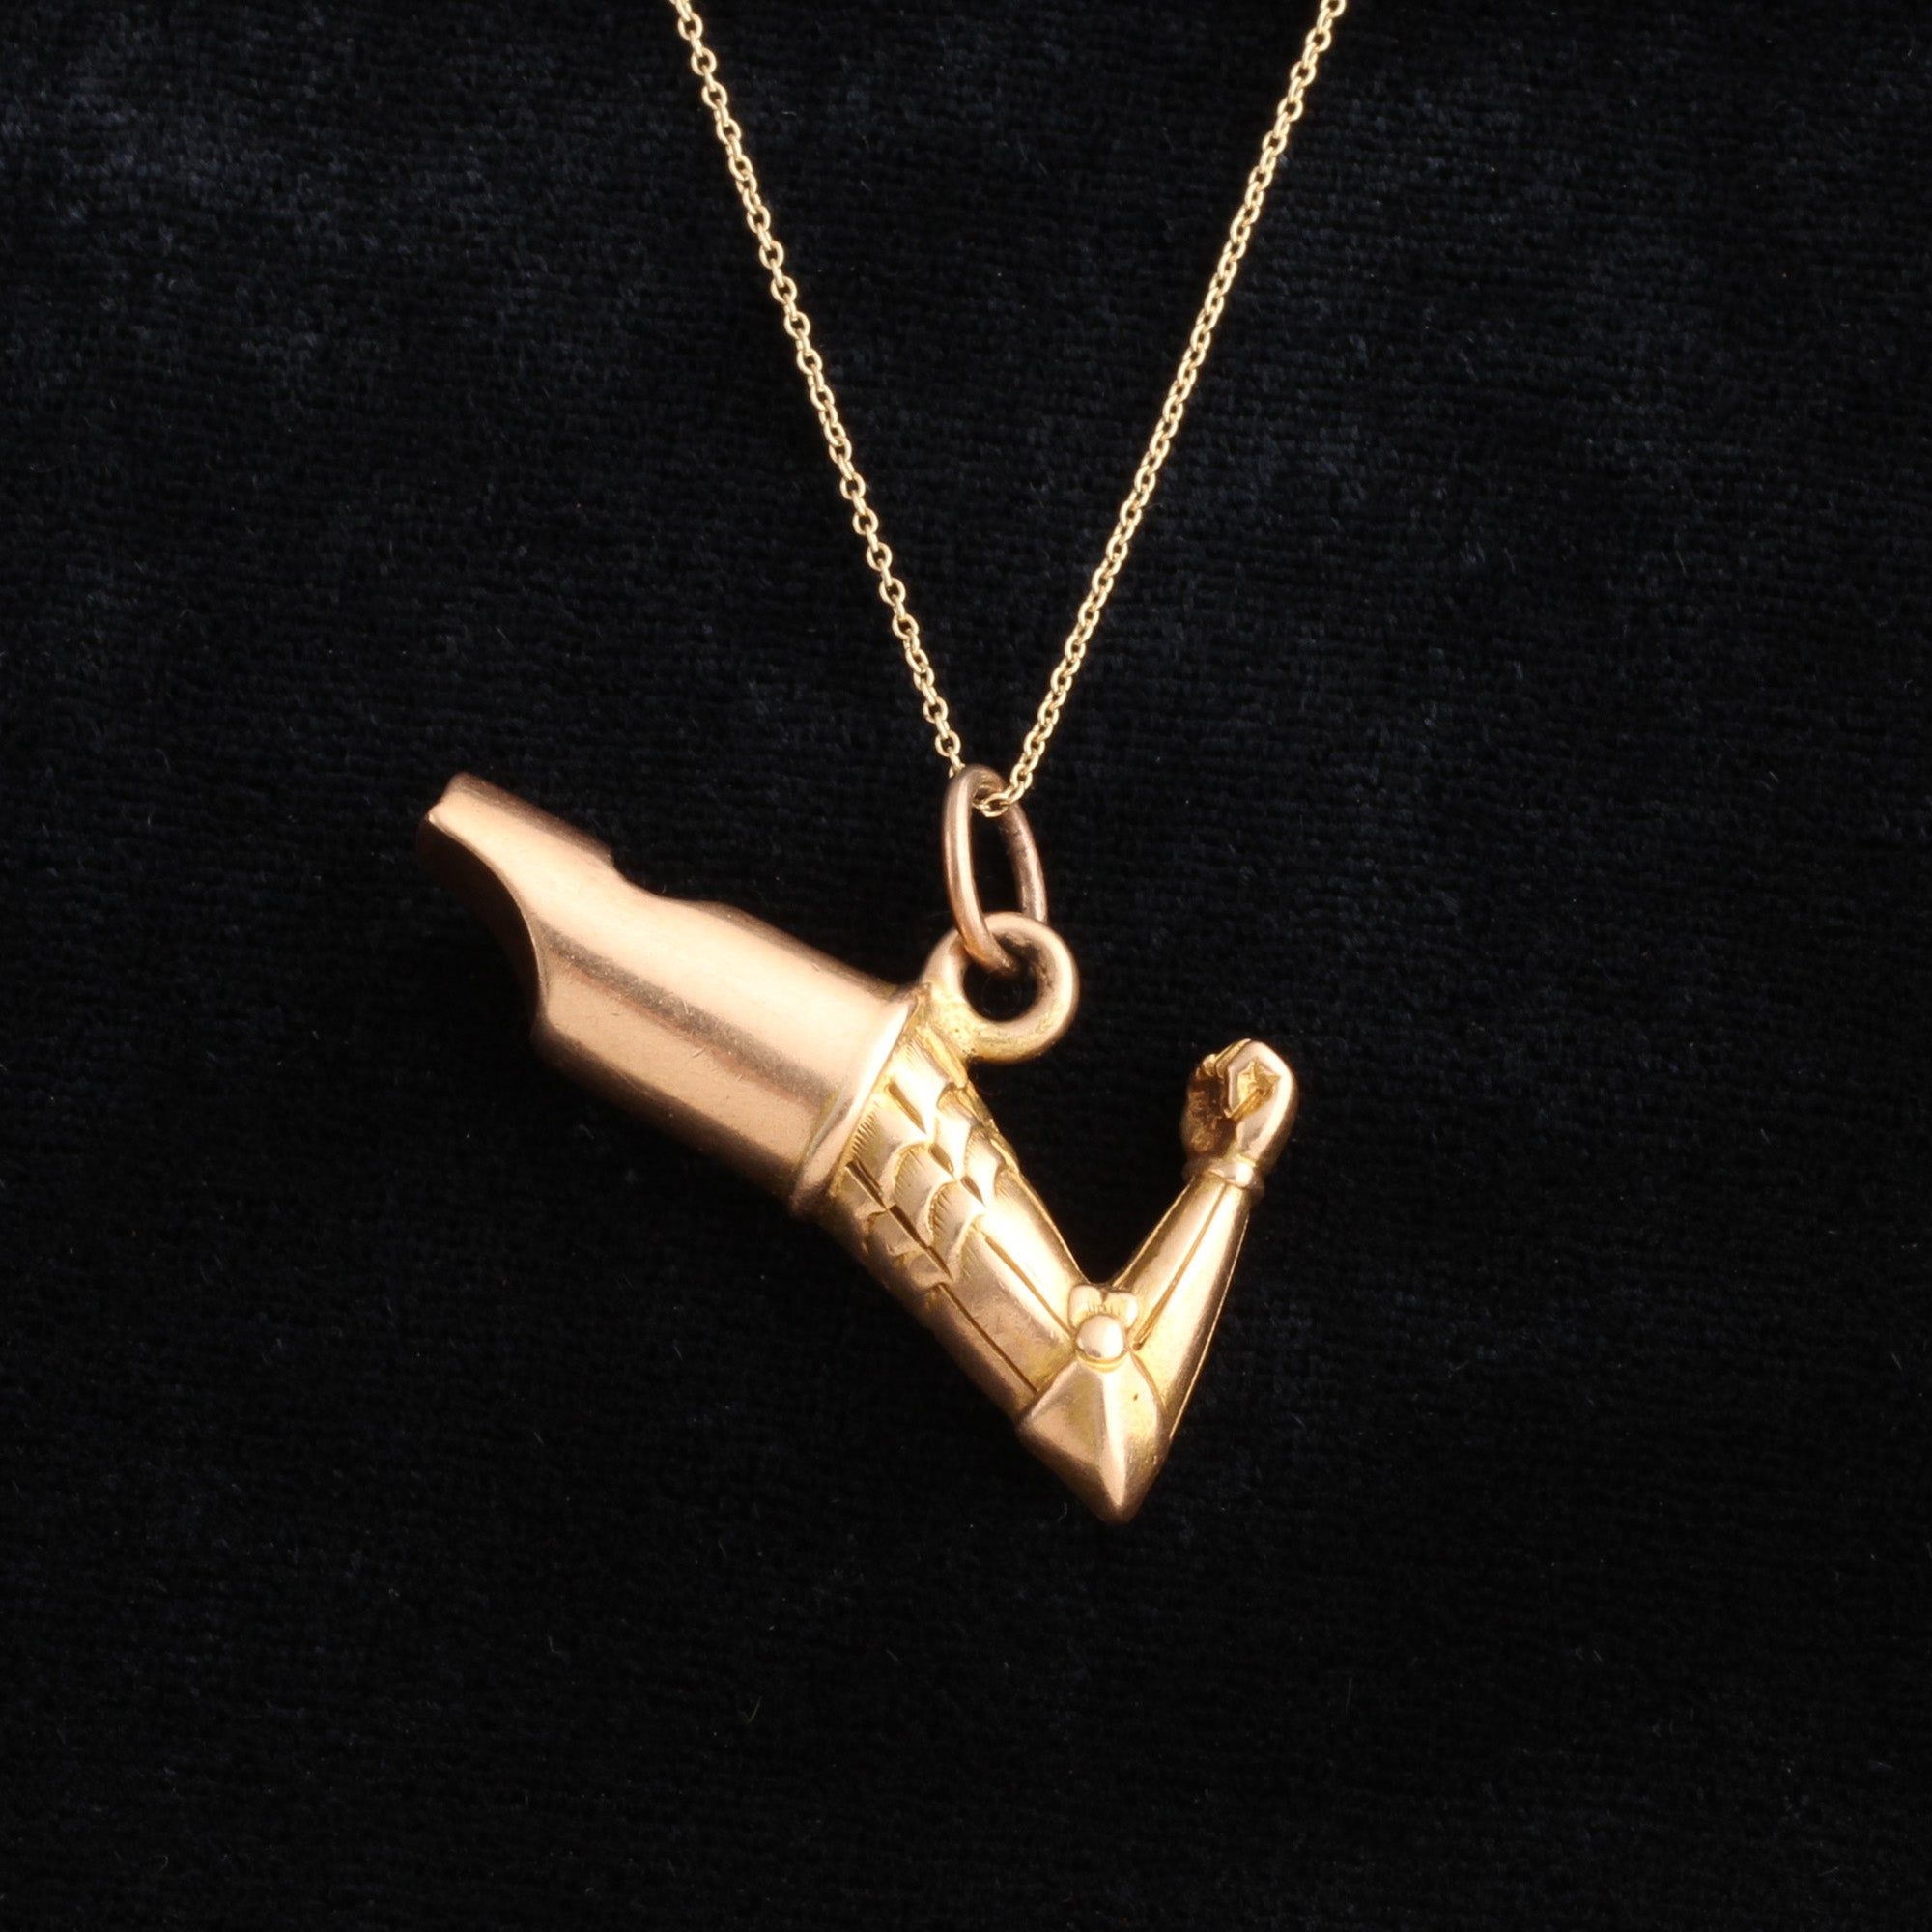 Victorian Whistle & Fist Charm